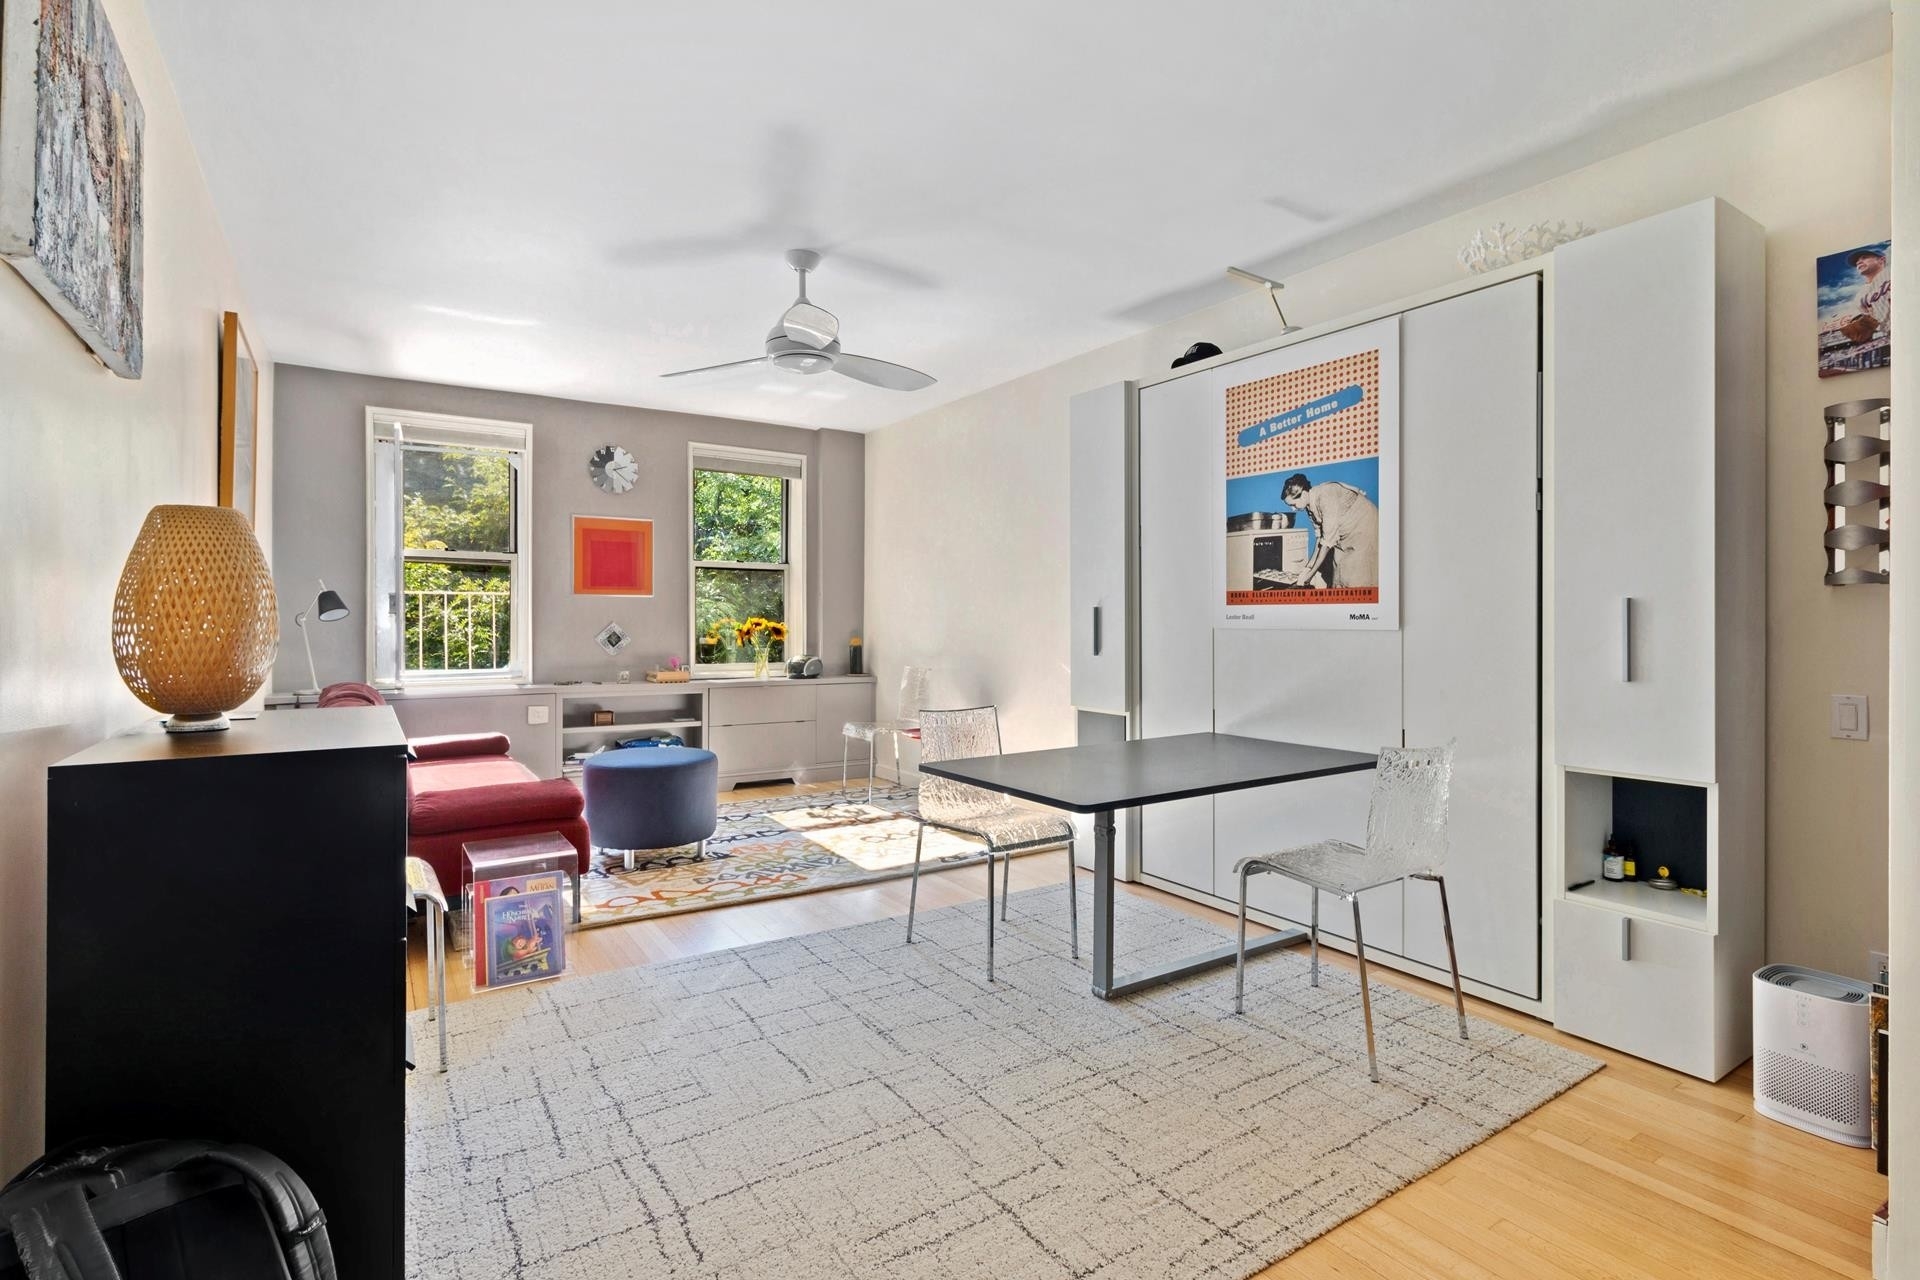 Co-op Properties for Sale at 225 E 76TH ST, 3D Lenox Hill, New York, NY 10021